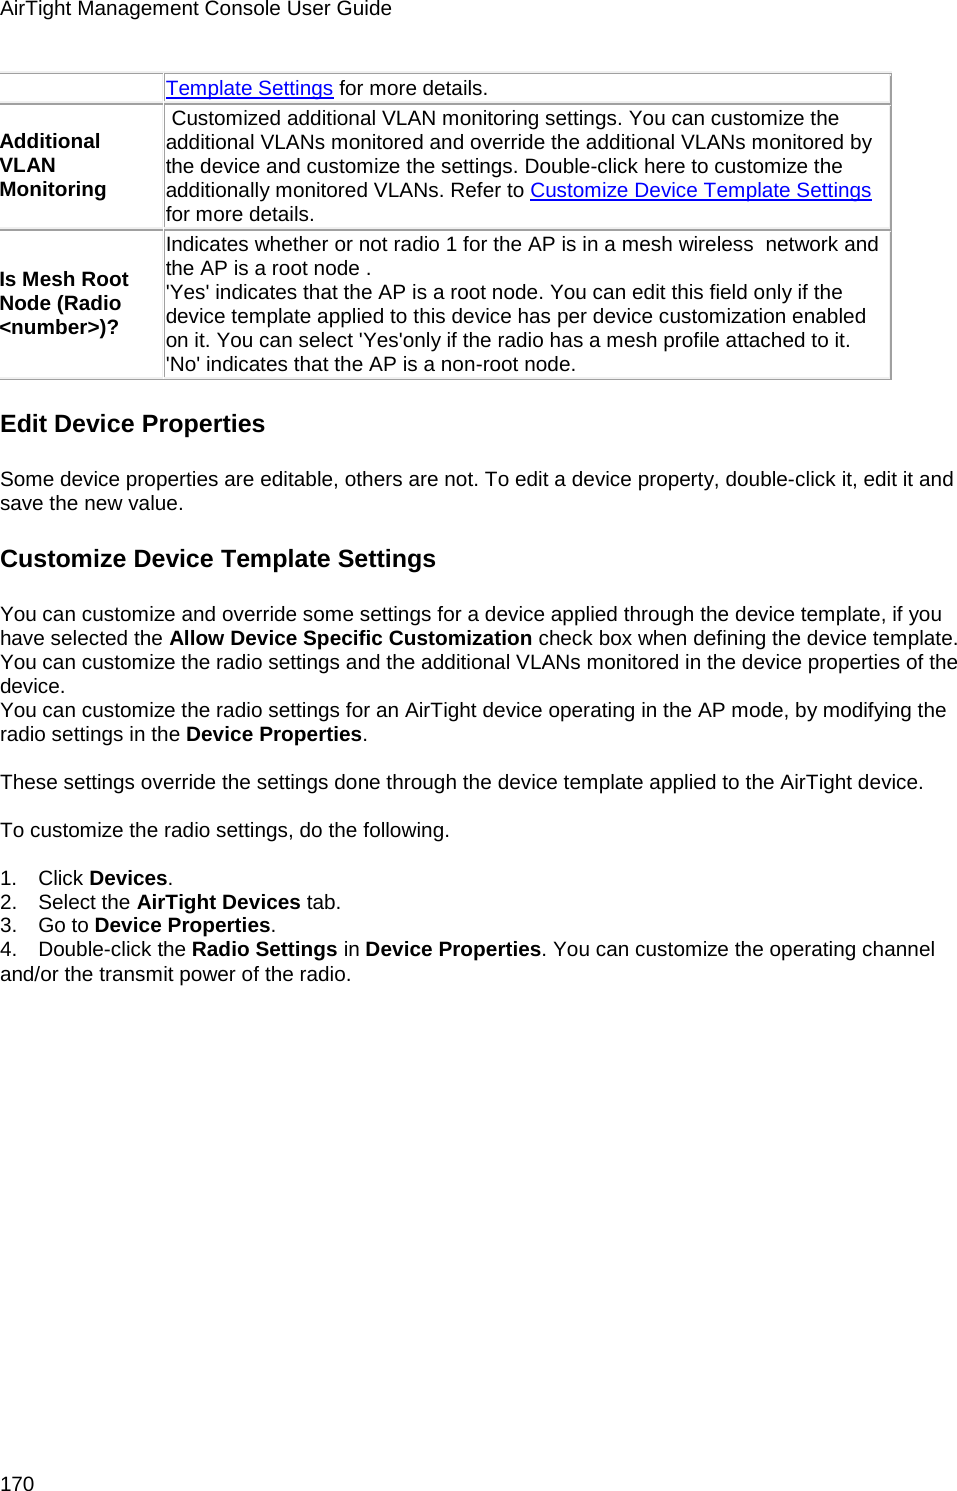 AirTight Management Console User Guide 170 Template Settings for more details. Additional VLAN Monitoring  Customized additional VLAN monitoring settings. You can customize the additional VLANs monitored and override the additional VLANs monitored by the device and customize the settings. Double-click here to customize the additionally monitored VLANs. Refer to Customize Device Template Settings for more details. Is Mesh Root Node (Radio &lt;number&gt;)? Indicates whether or not radio 1 for the AP is in a mesh wireless  network and the AP is a root node .  &apos;Yes&apos; indicates that the AP is a root node. You can edit this field only if the device template applied to this device has per device customization enabled on it. You can select &apos;Yes&apos;only if the radio has a mesh profile attached to it.  &apos;No&apos; indicates that the AP is a non-root node. Edit Device Properties Some device properties are editable, others are not. To edit a device property, double-click it, edit it and save the new value. Customize Device Template Settings  You can customize and override some settings for a device applied through the device template, if you have selected the Allow Device Specific Customization check box when defining the device template. You can customize the radio settings and the additional VLANs monitored in the device properties of the device. You can customize the radio settings for an AirTight device operating in the AP mode, by modifying the radio settings in the Device Properties.   These settings override the settings done through the device template applied to the AirTight device.   To customize the radio settings, do the following.   1.      Click Devices. 2.      Select the AirTight Devices tab. 3.      Go to Device Properties. 4.      Double-click the Radio Settings in Device Properties. You can customize the operating channel and/or the transmit power of the radio.   